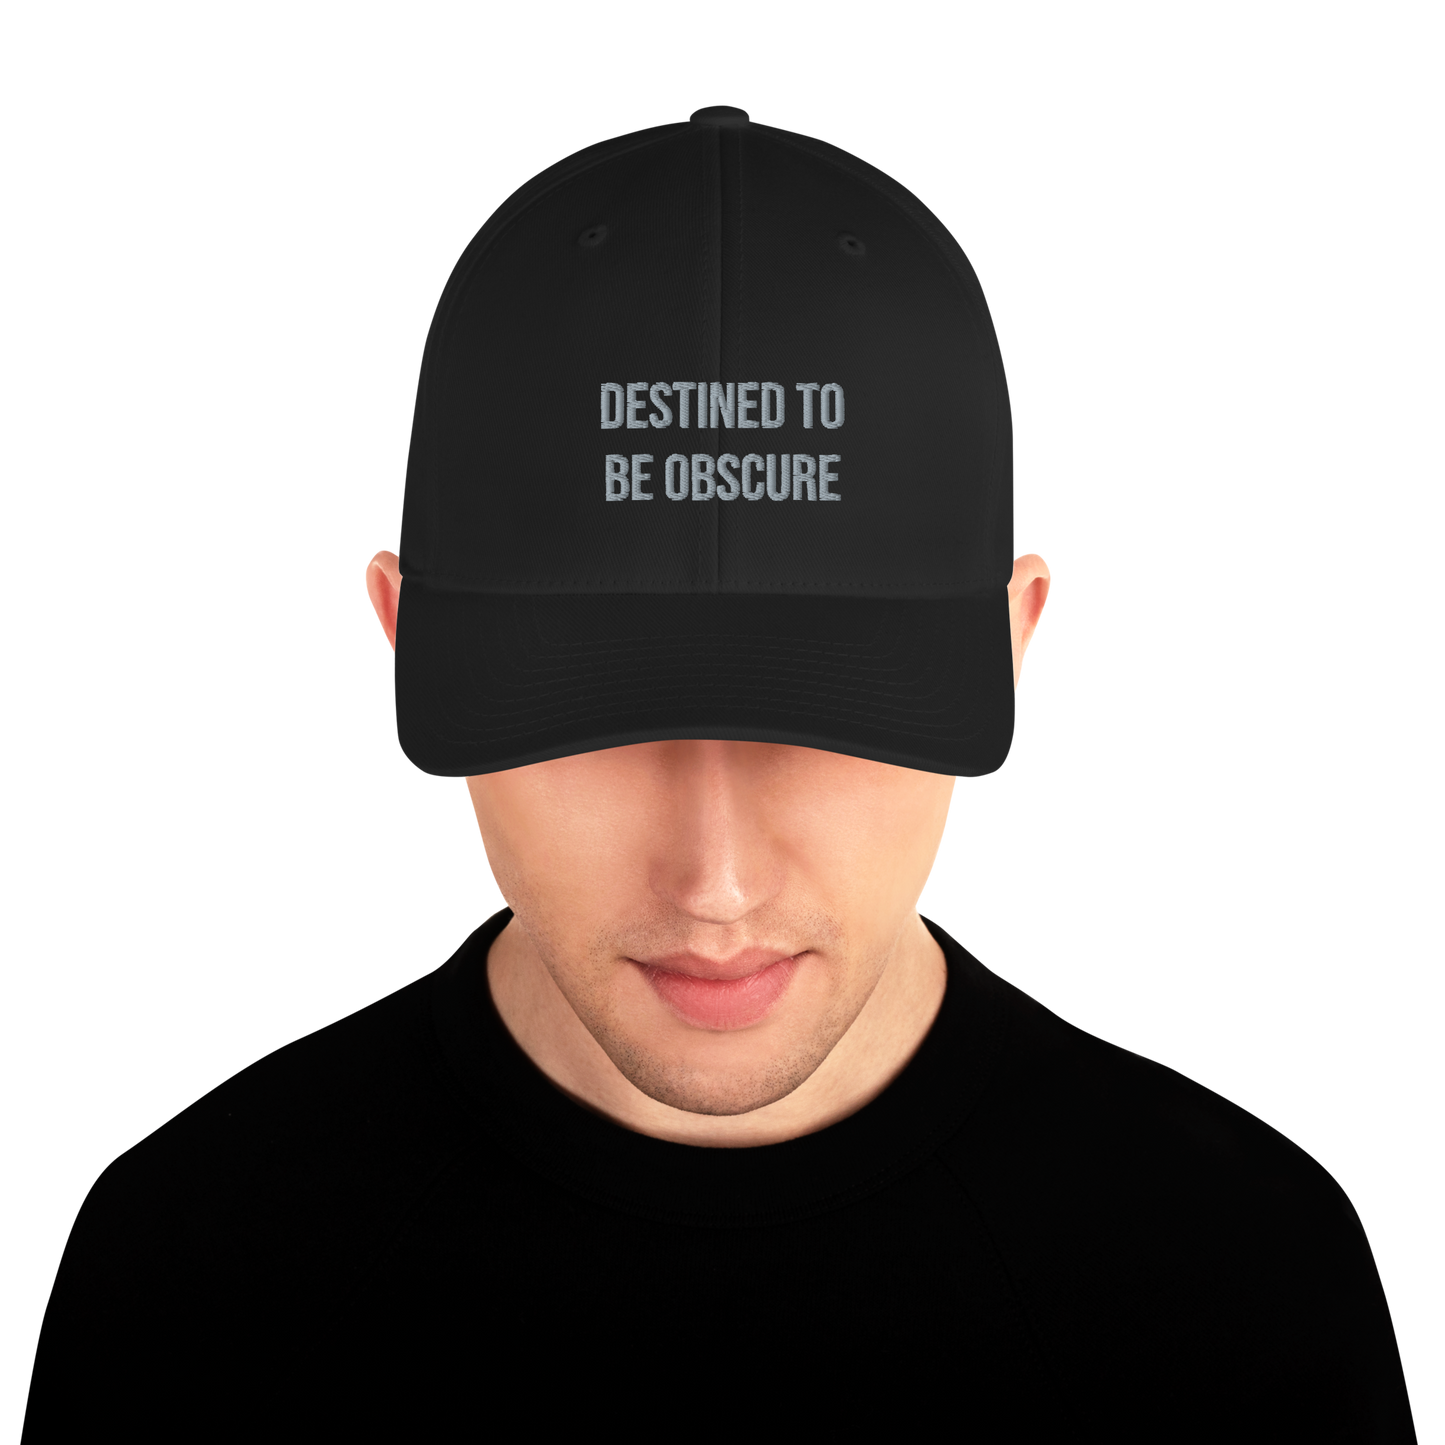 Close Back Hat "DESTINED TO BE OBSCURE"